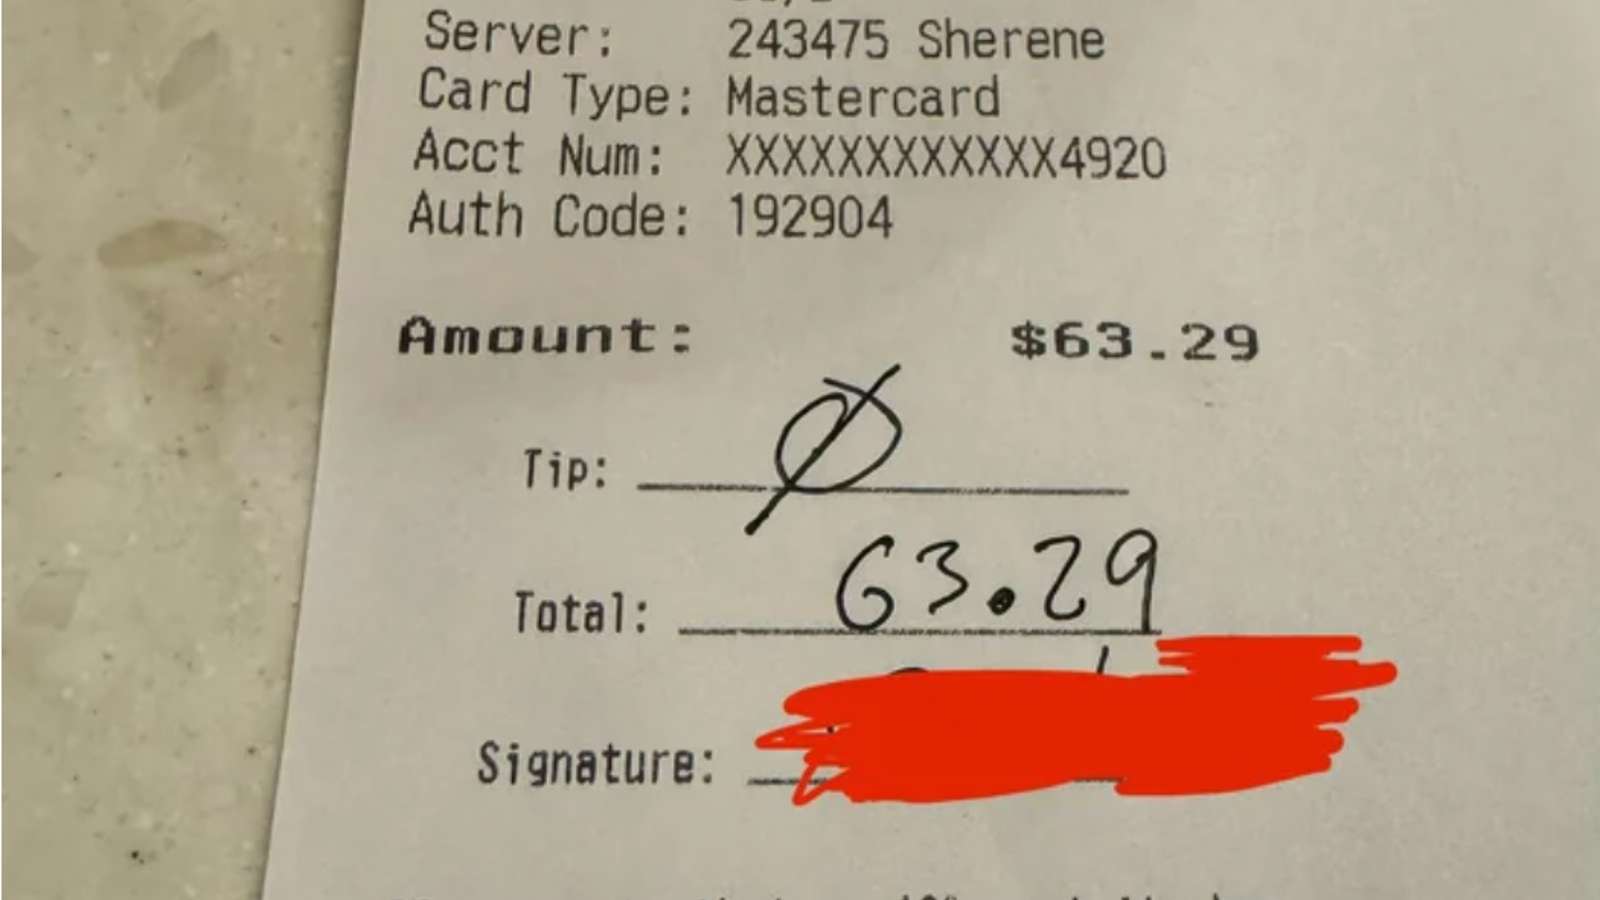 Customer refuses to tip